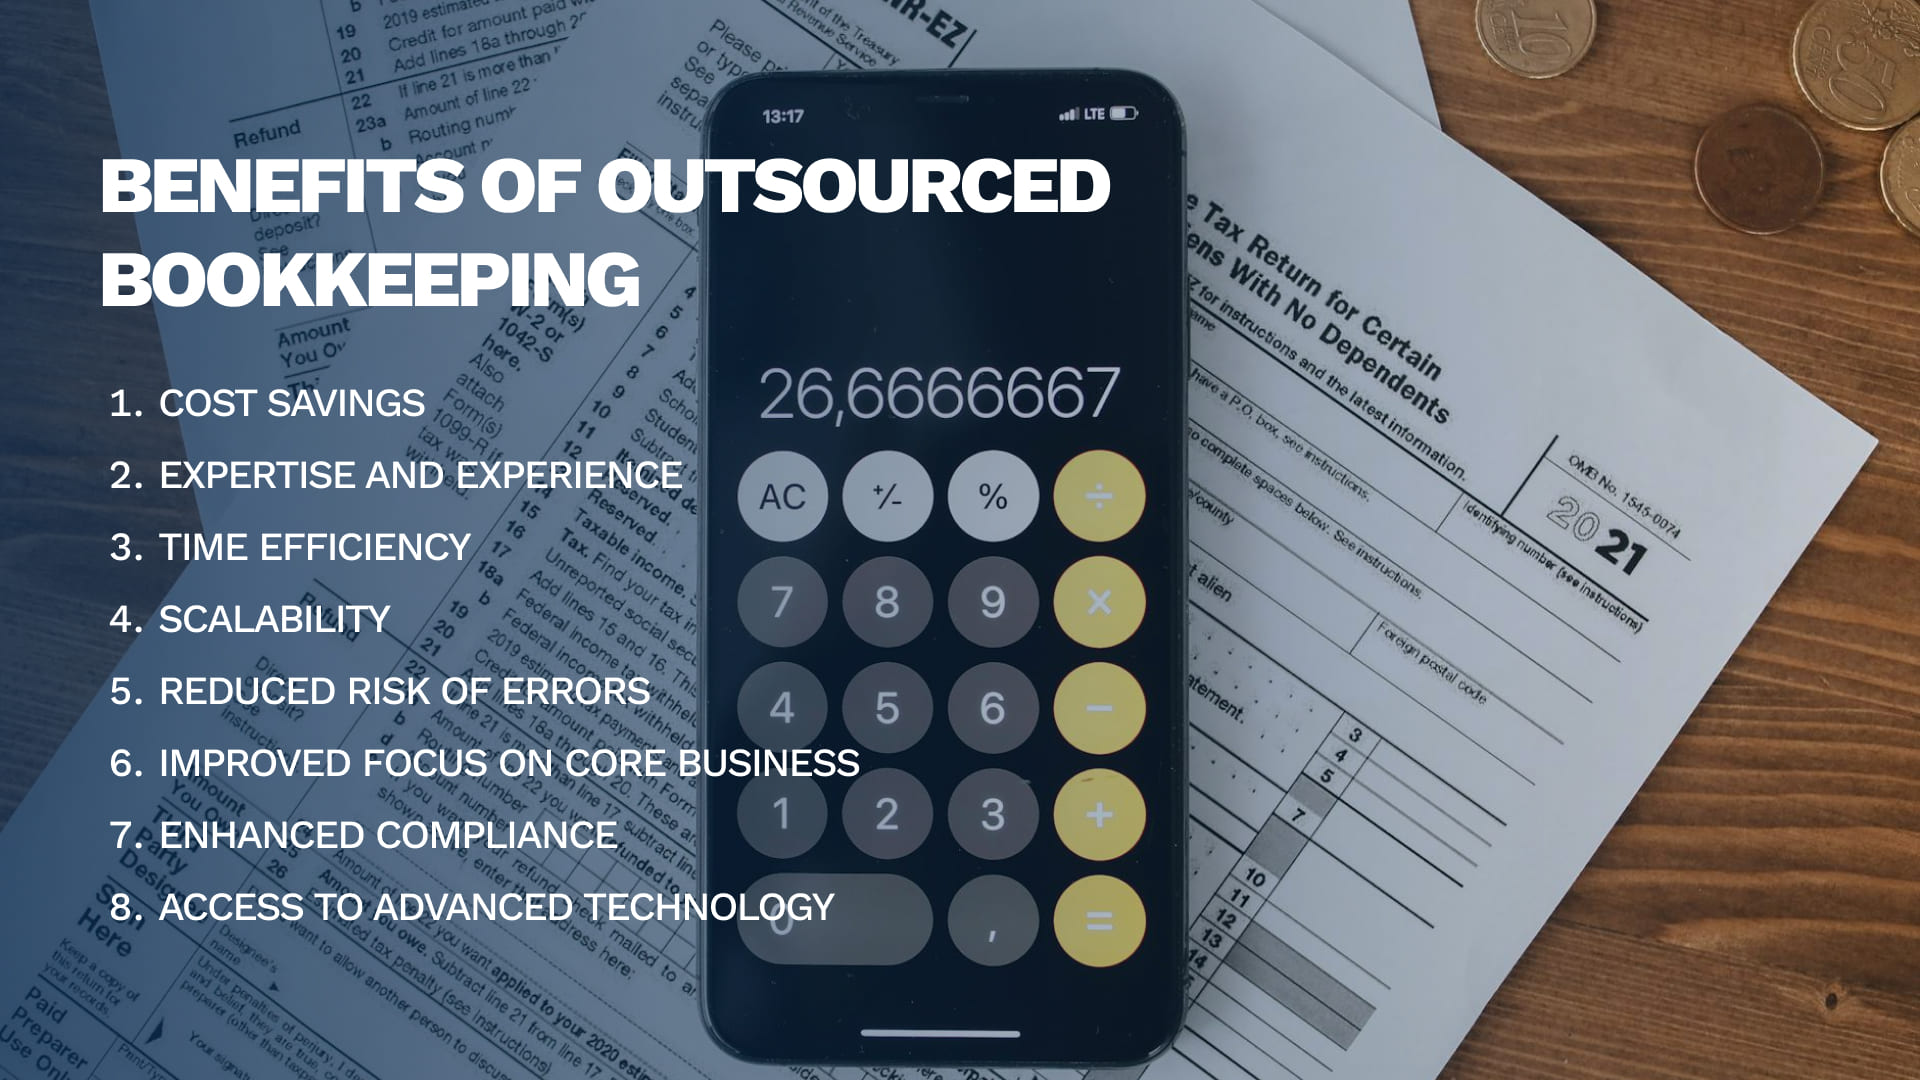 Benefits of Outsourced Bookkeeping